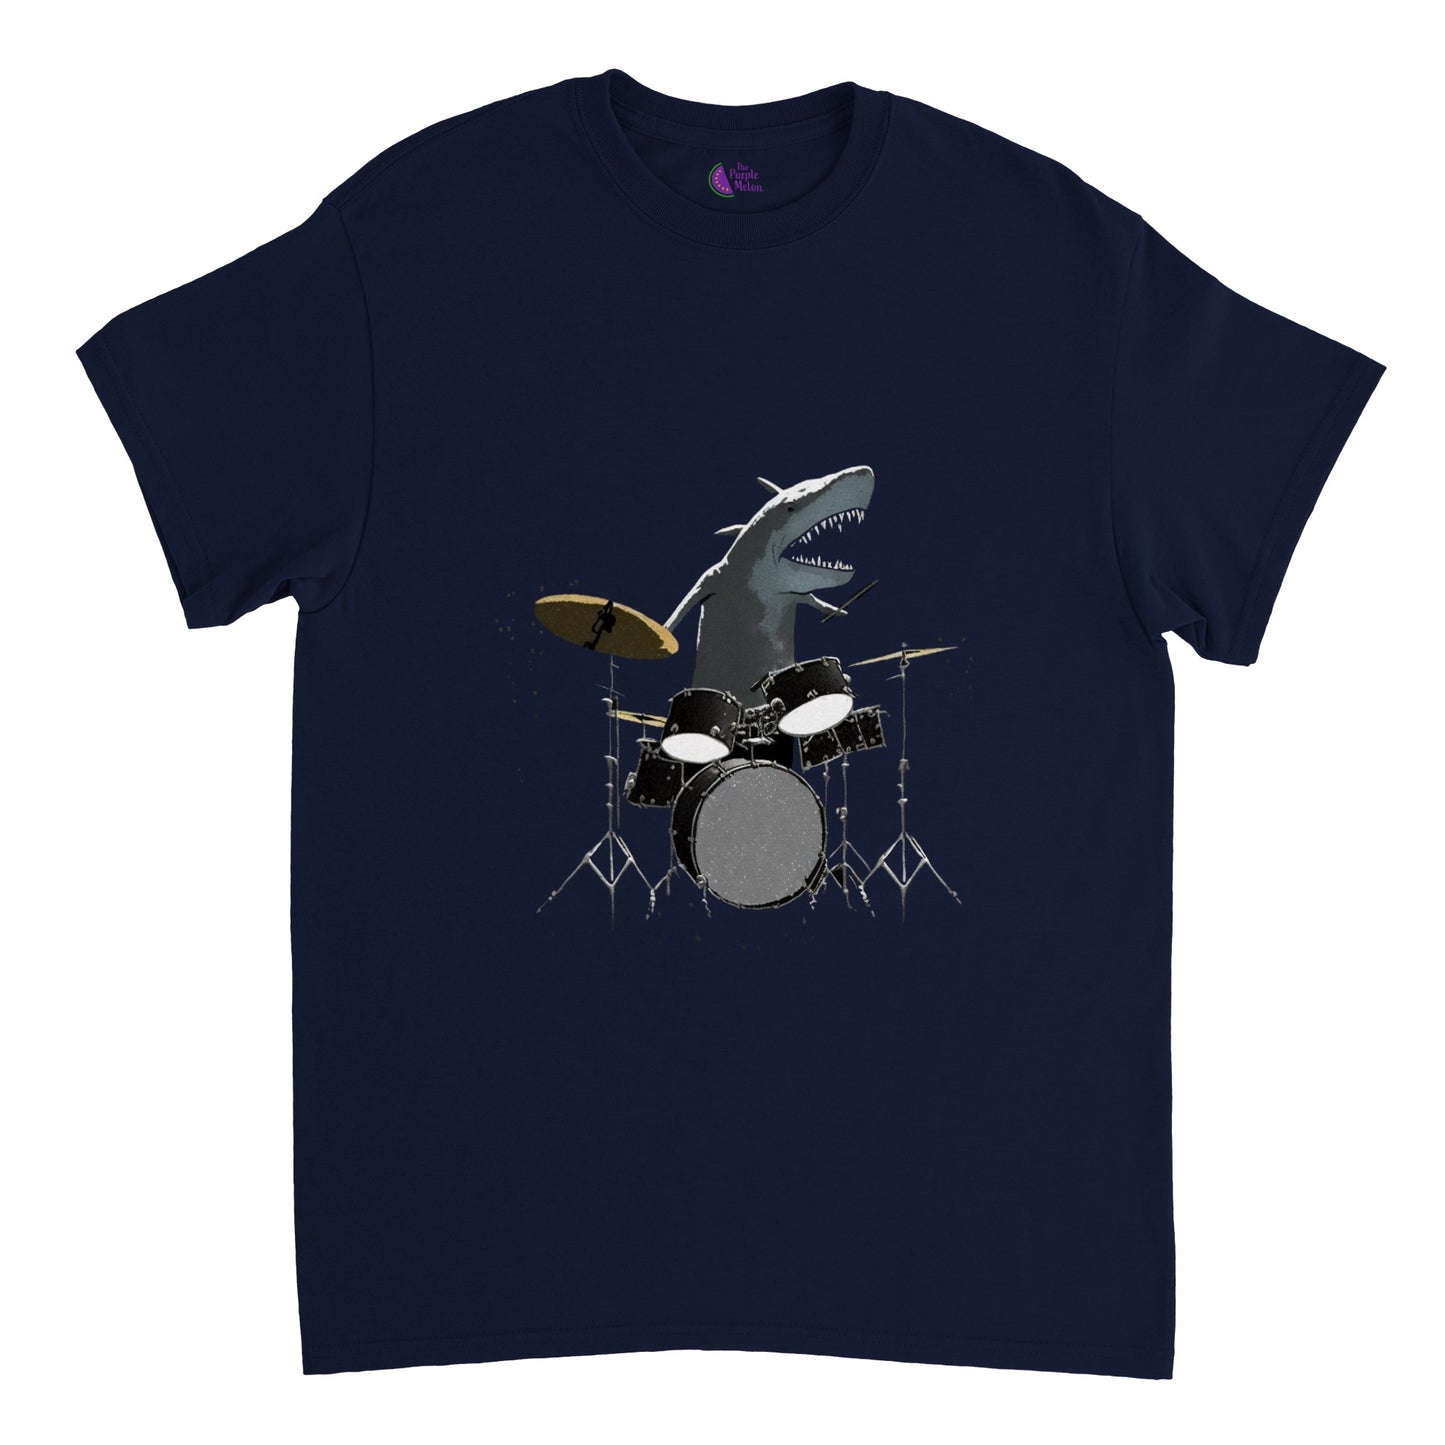 A navy t-shirt with a shark playing drums illustration